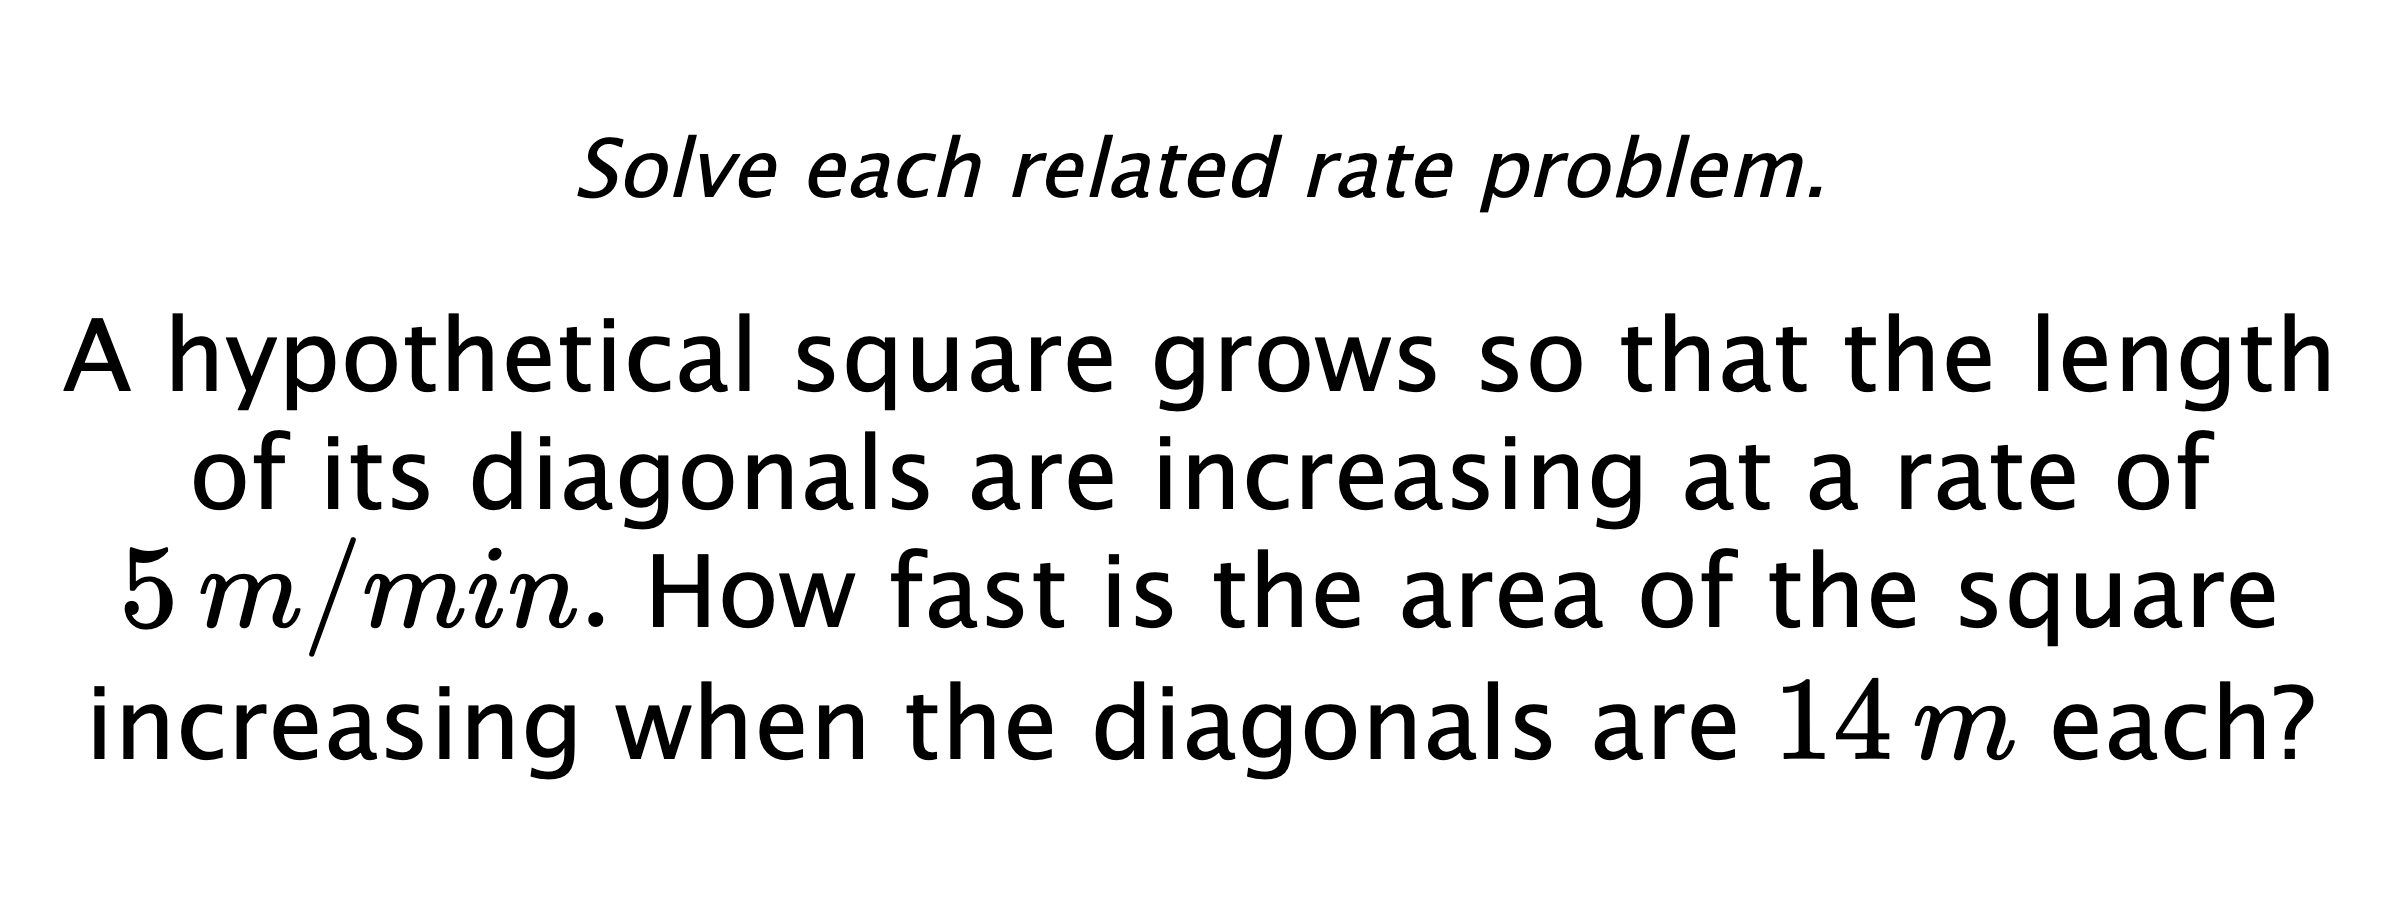 Solve each related rate problem. A hypothetical square grows so that the length of its diagonals are increasing at a rate of $5\,m/min.$ How fast is the area of the square increasing when the diagonals are $14\,m$ each?